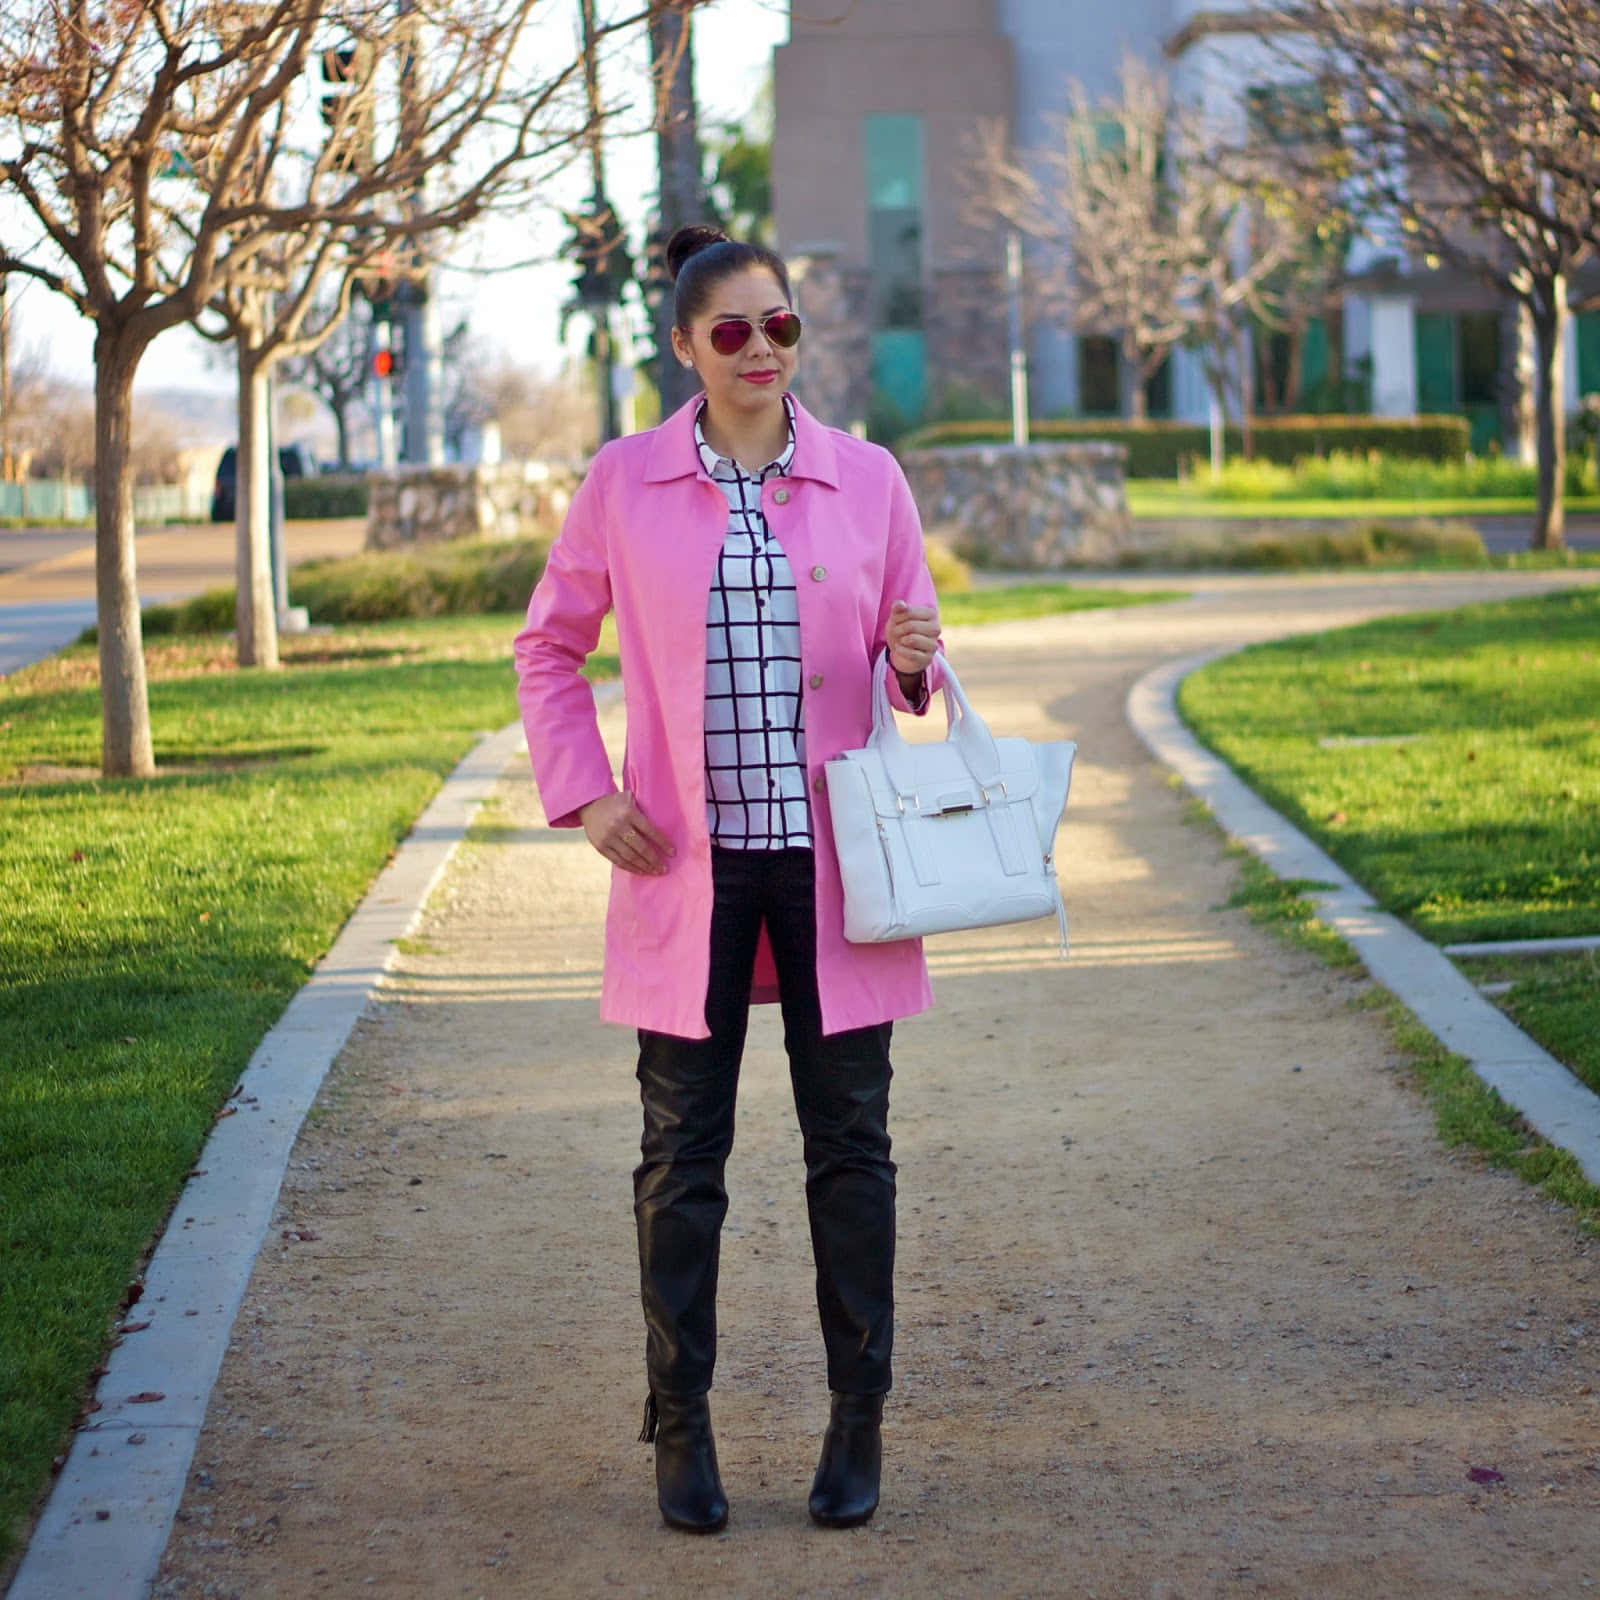 Stylish Woman in a Chic Pink Coat Wallpaper